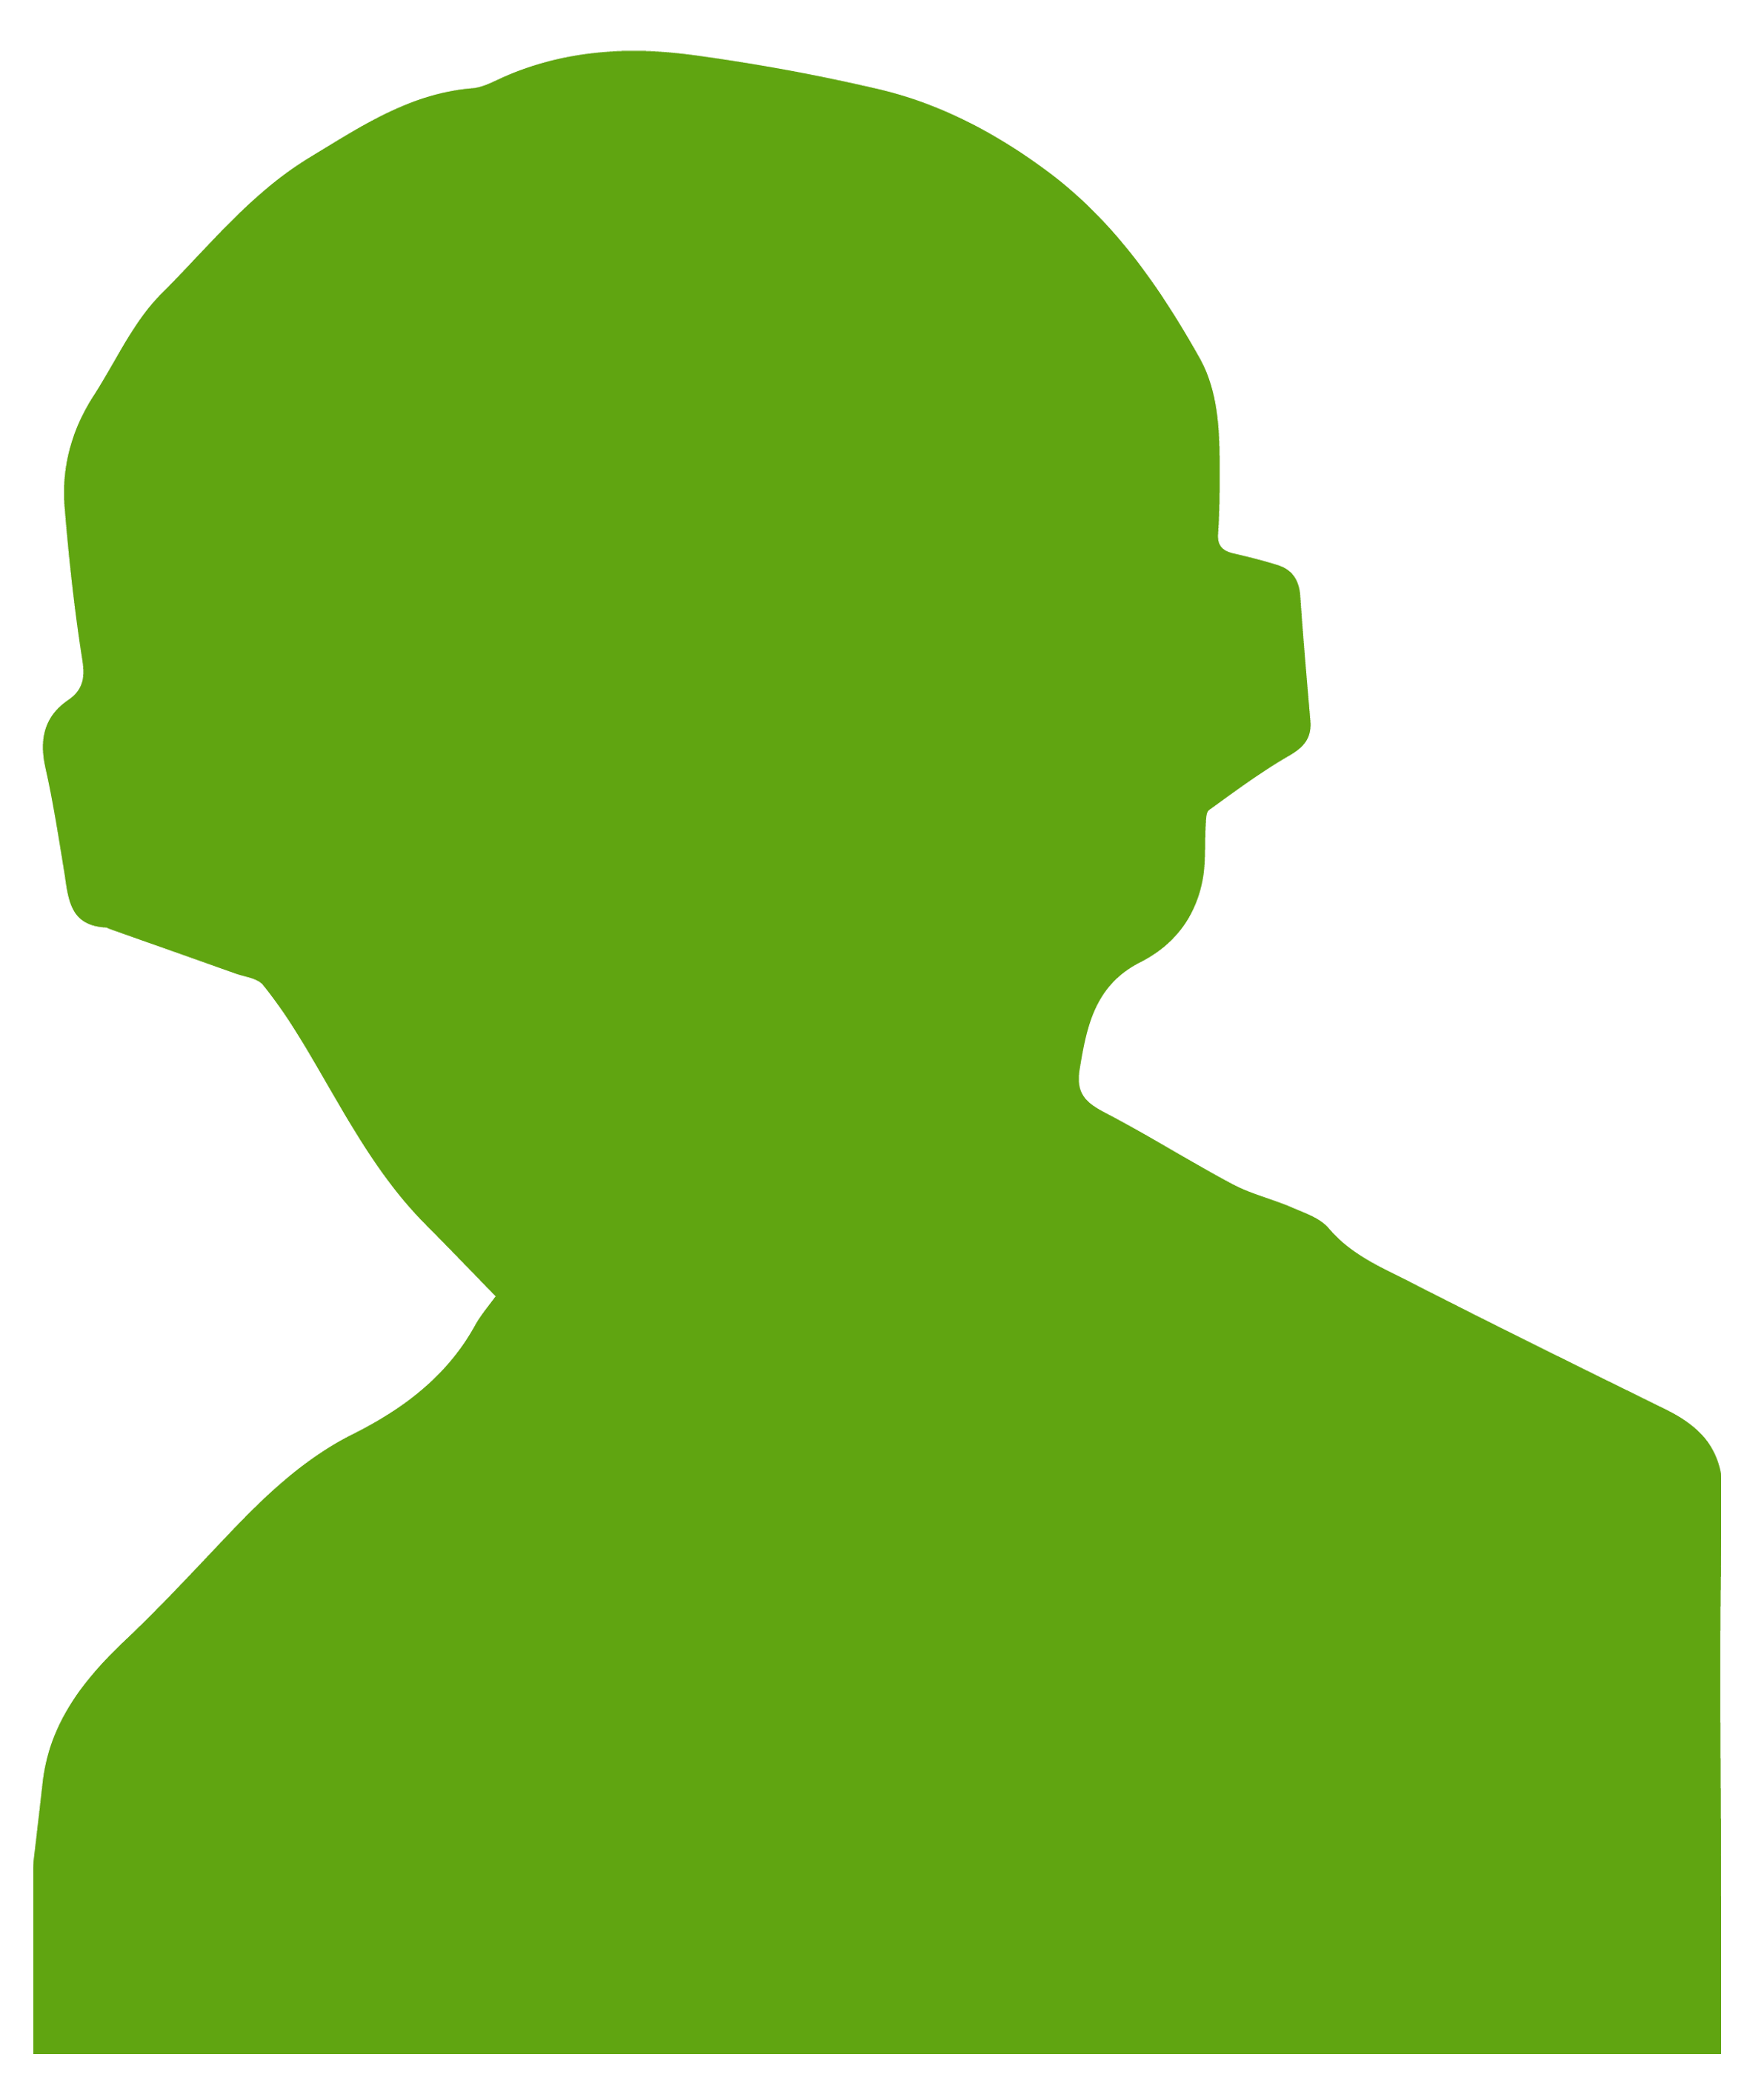 Green silhouette of Fanny Parker